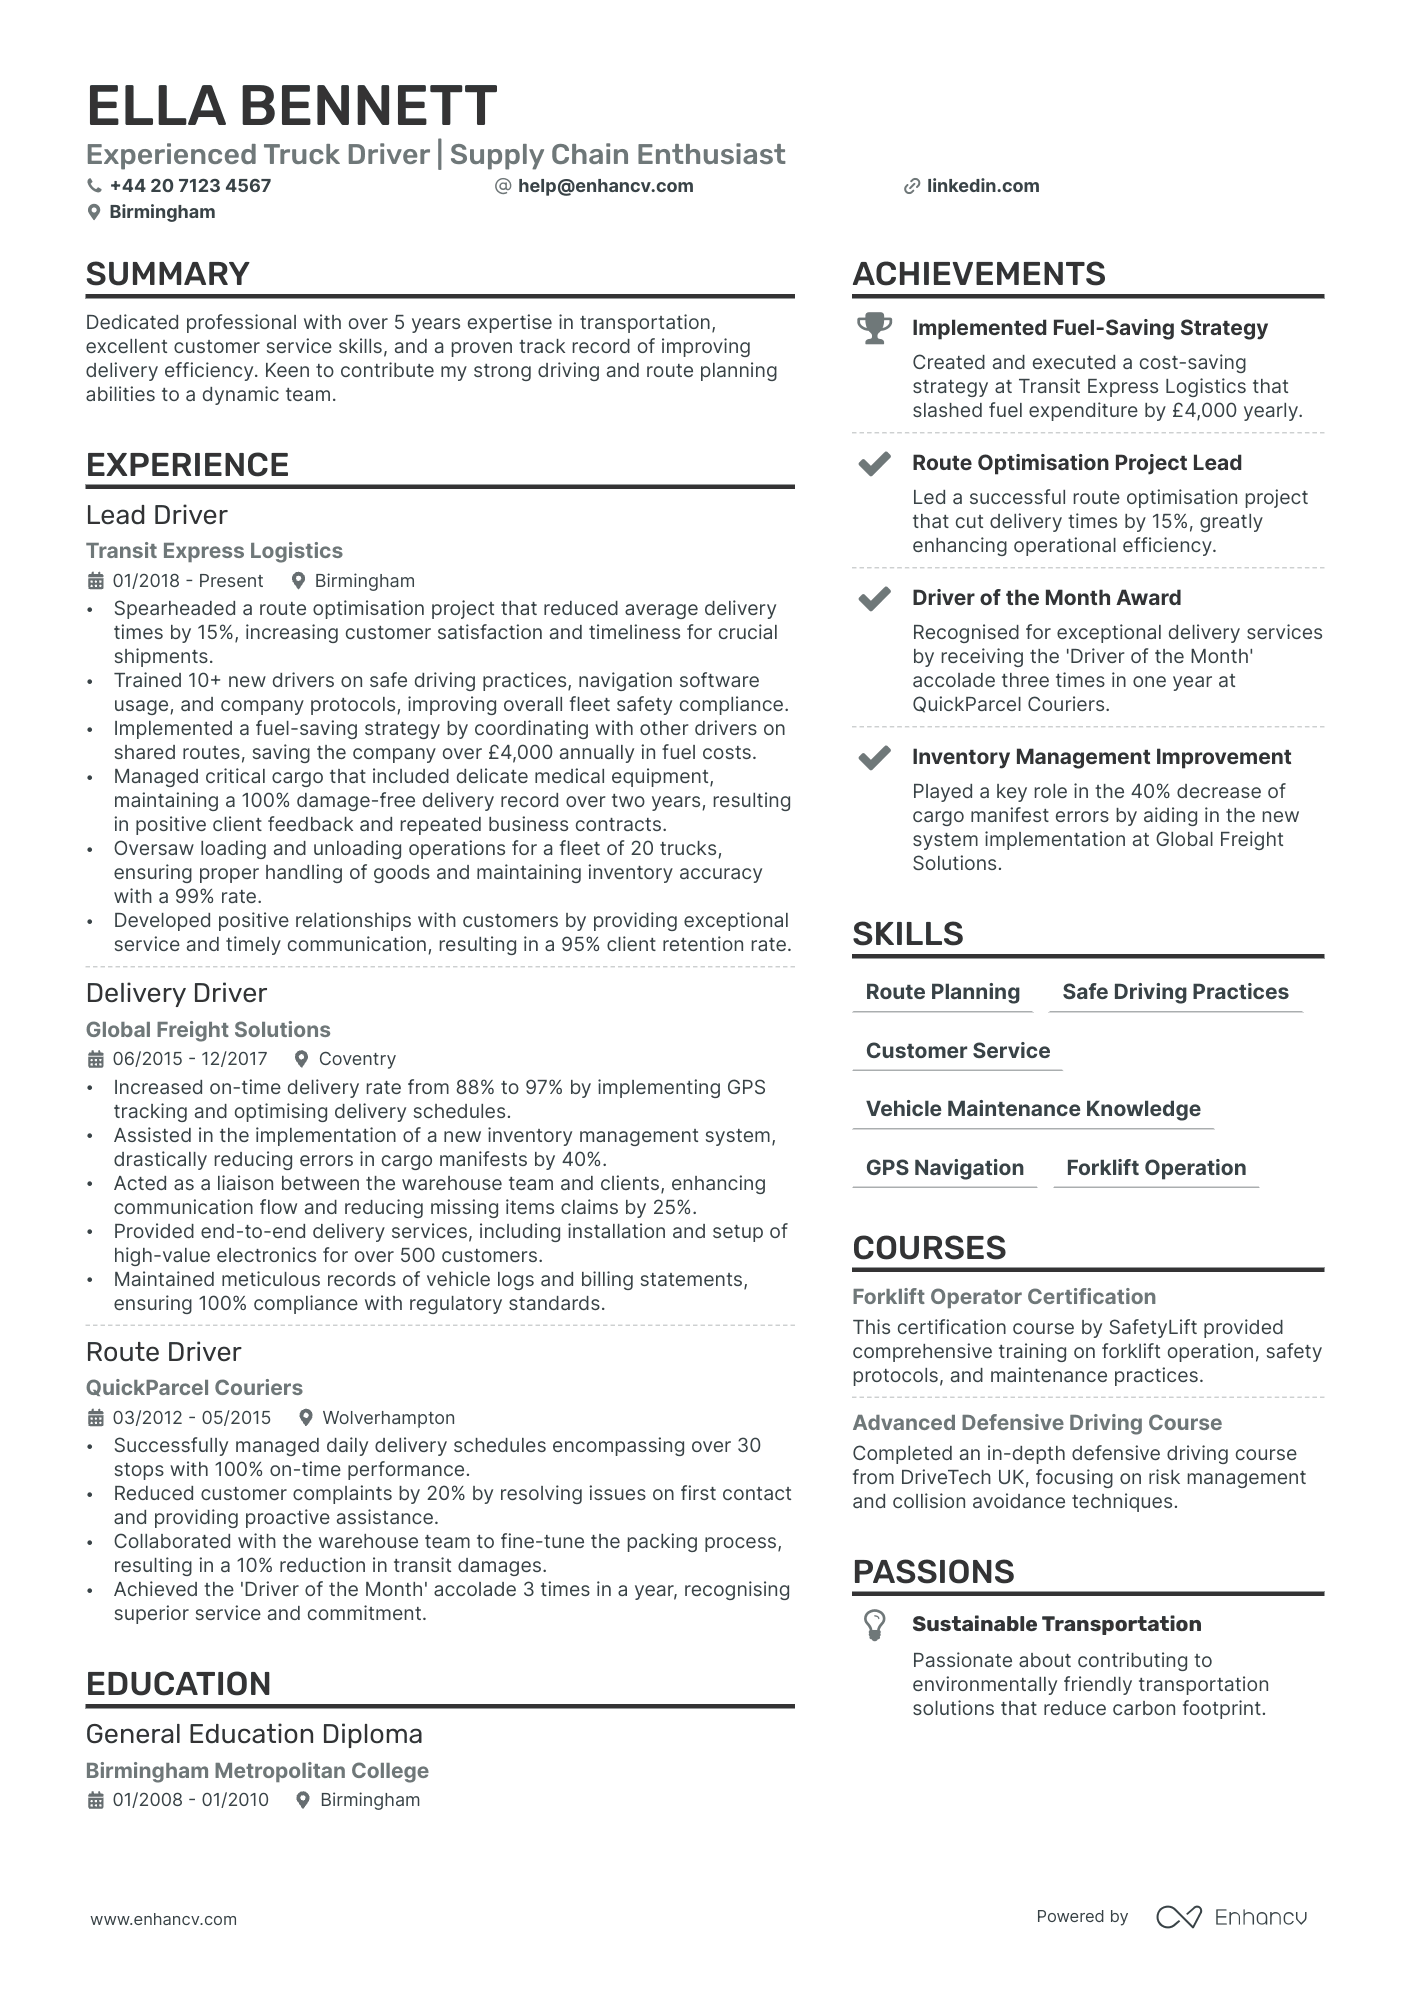 truck driver resume example